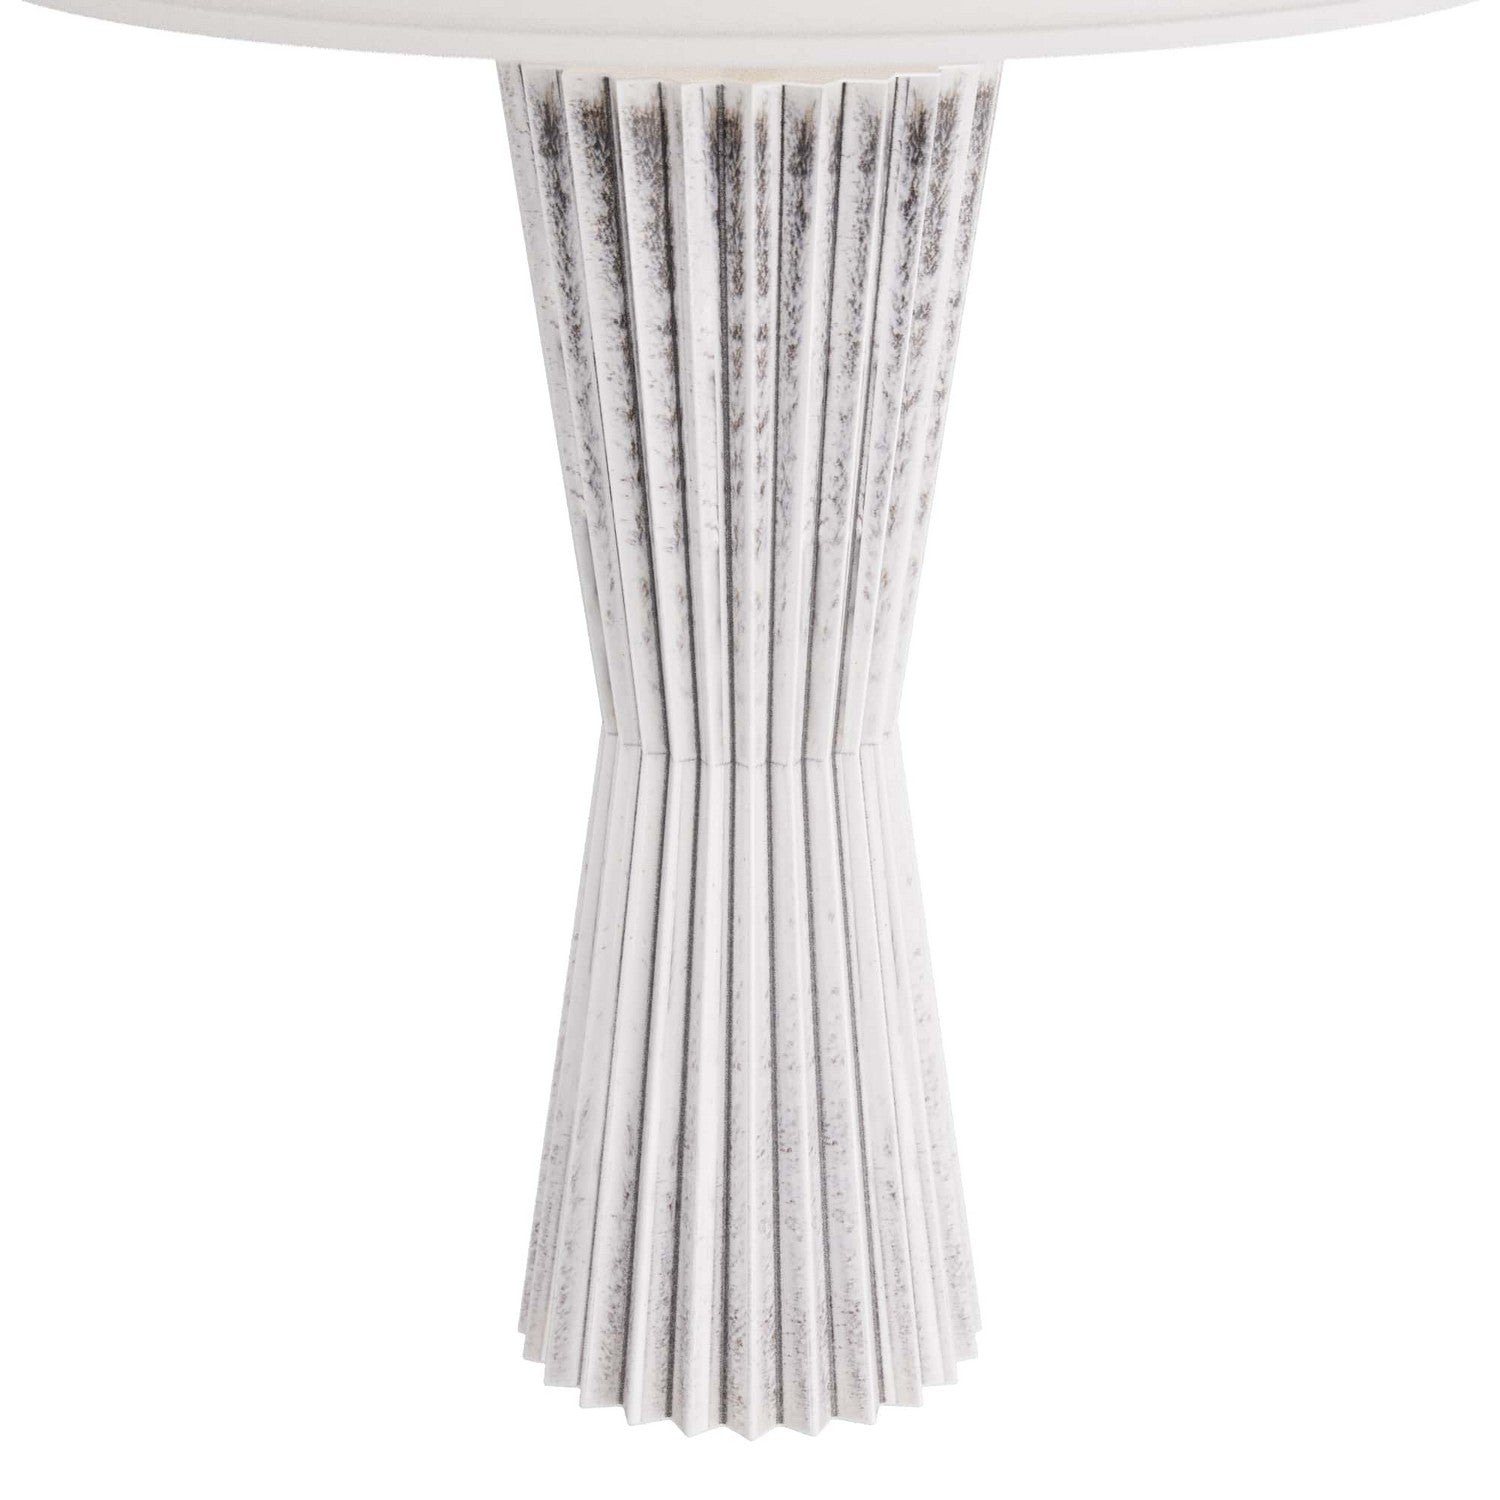 One Light Table Lamp from the Vayla collection in Ice Reactive finish